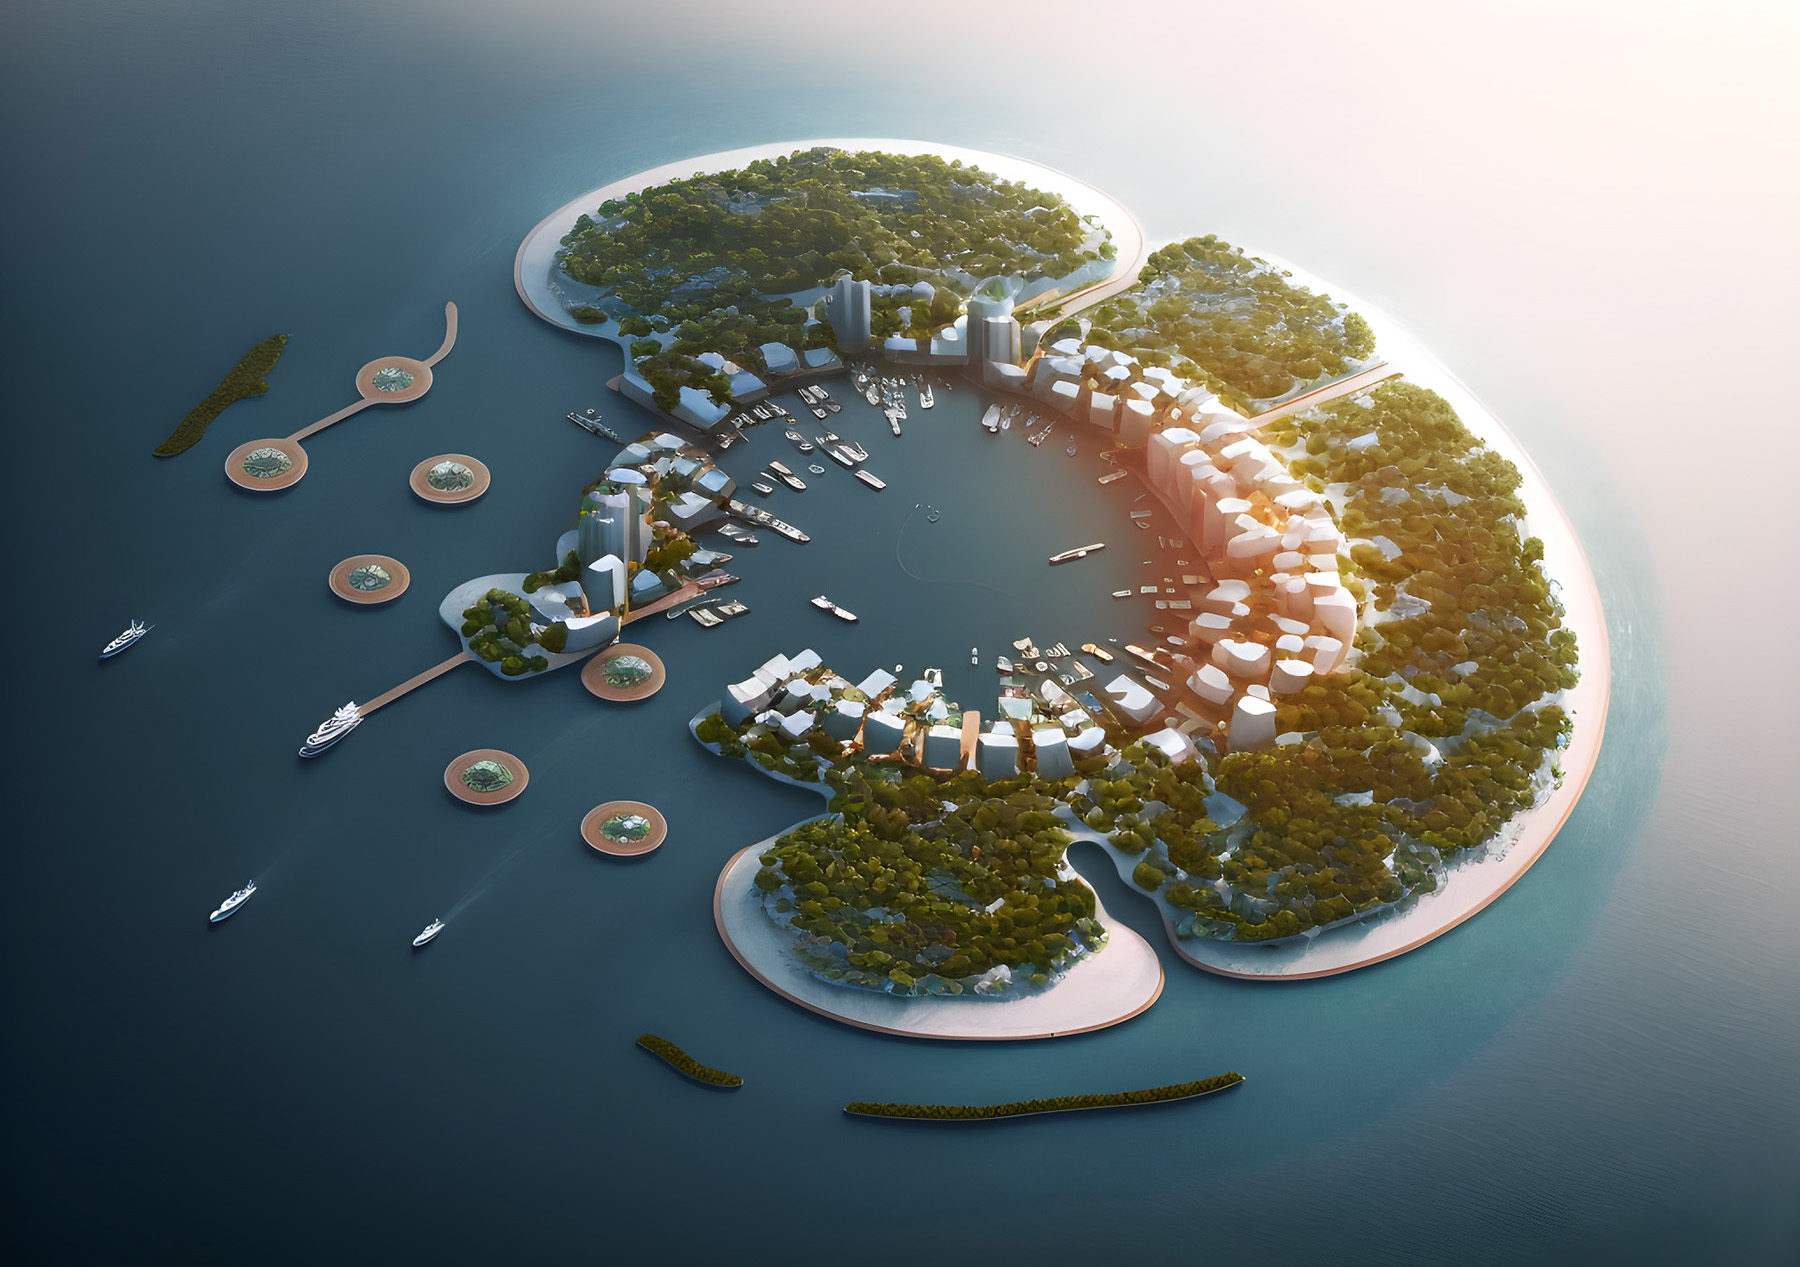 A futuristic city floats on water.